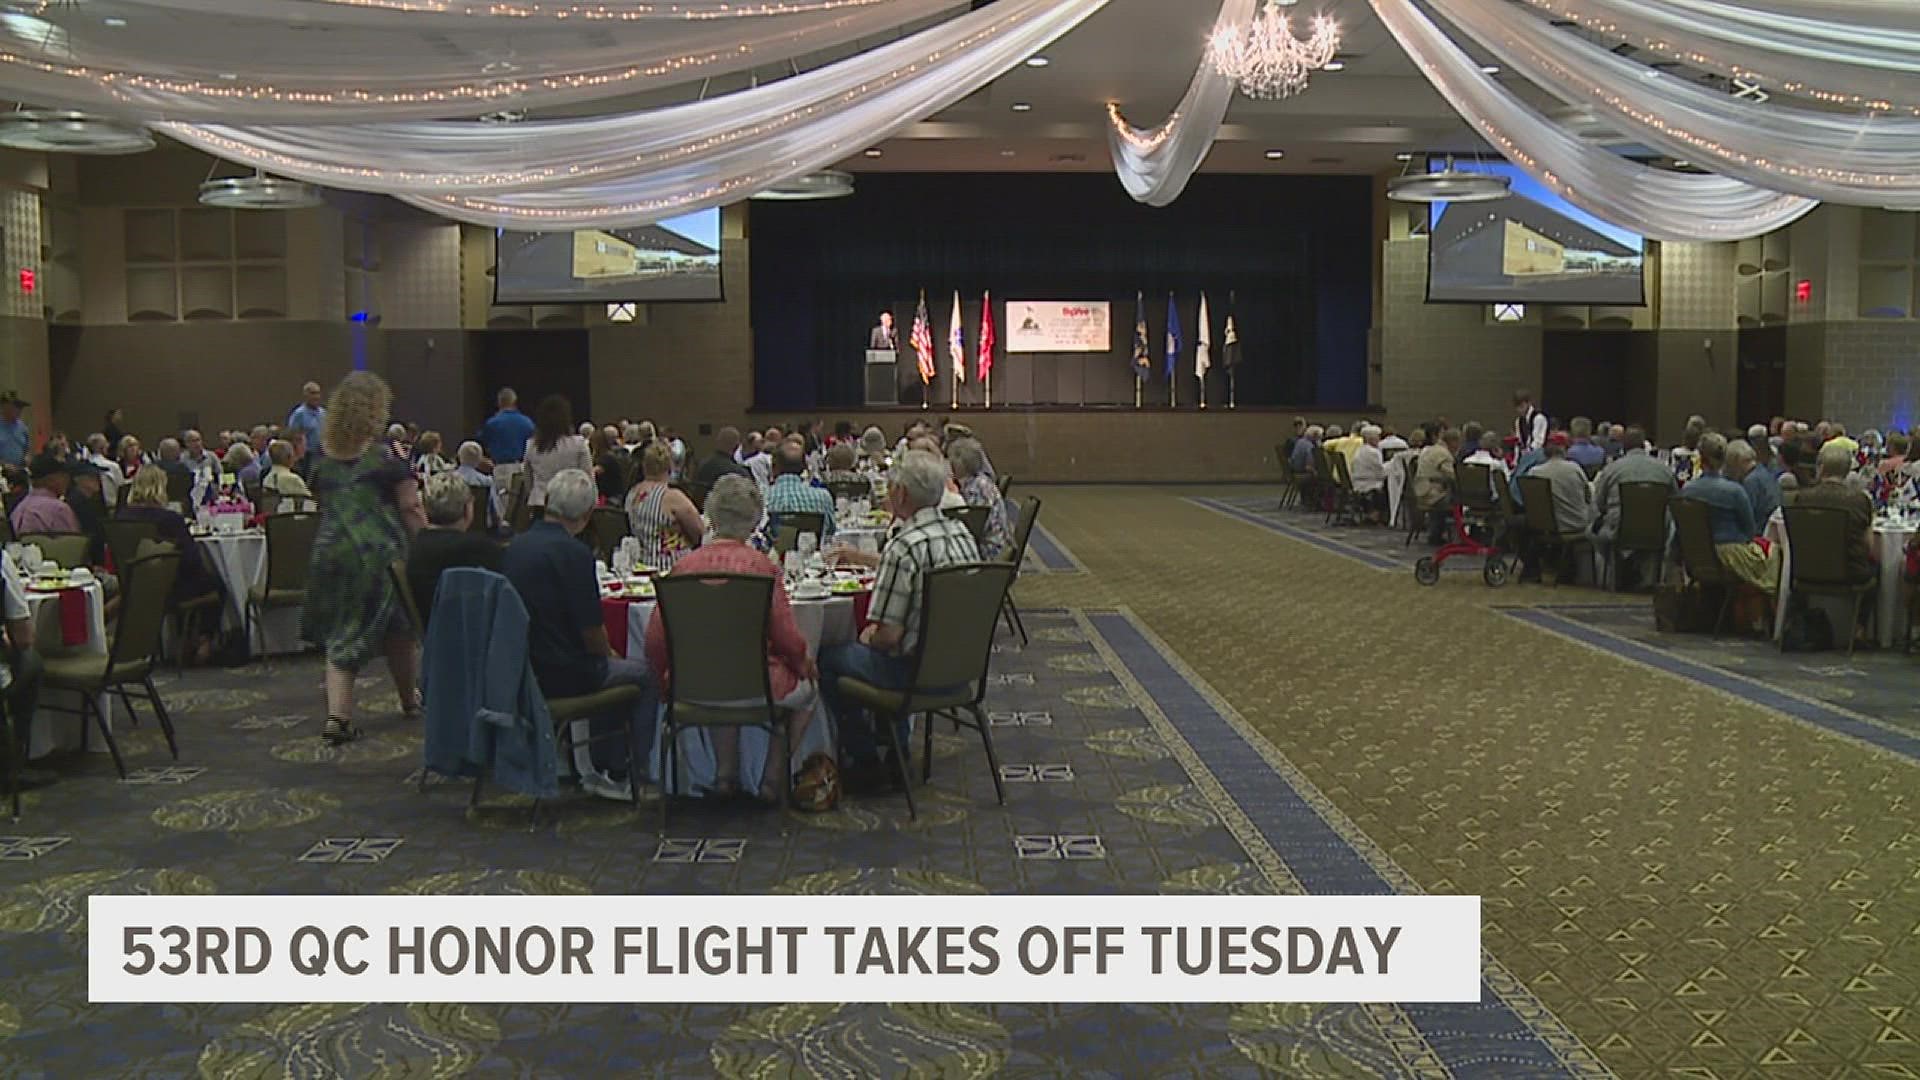 The 53rd Honor Flight will leave Tuesday at about 6 a.m. and return that evening at about 10 p.m.